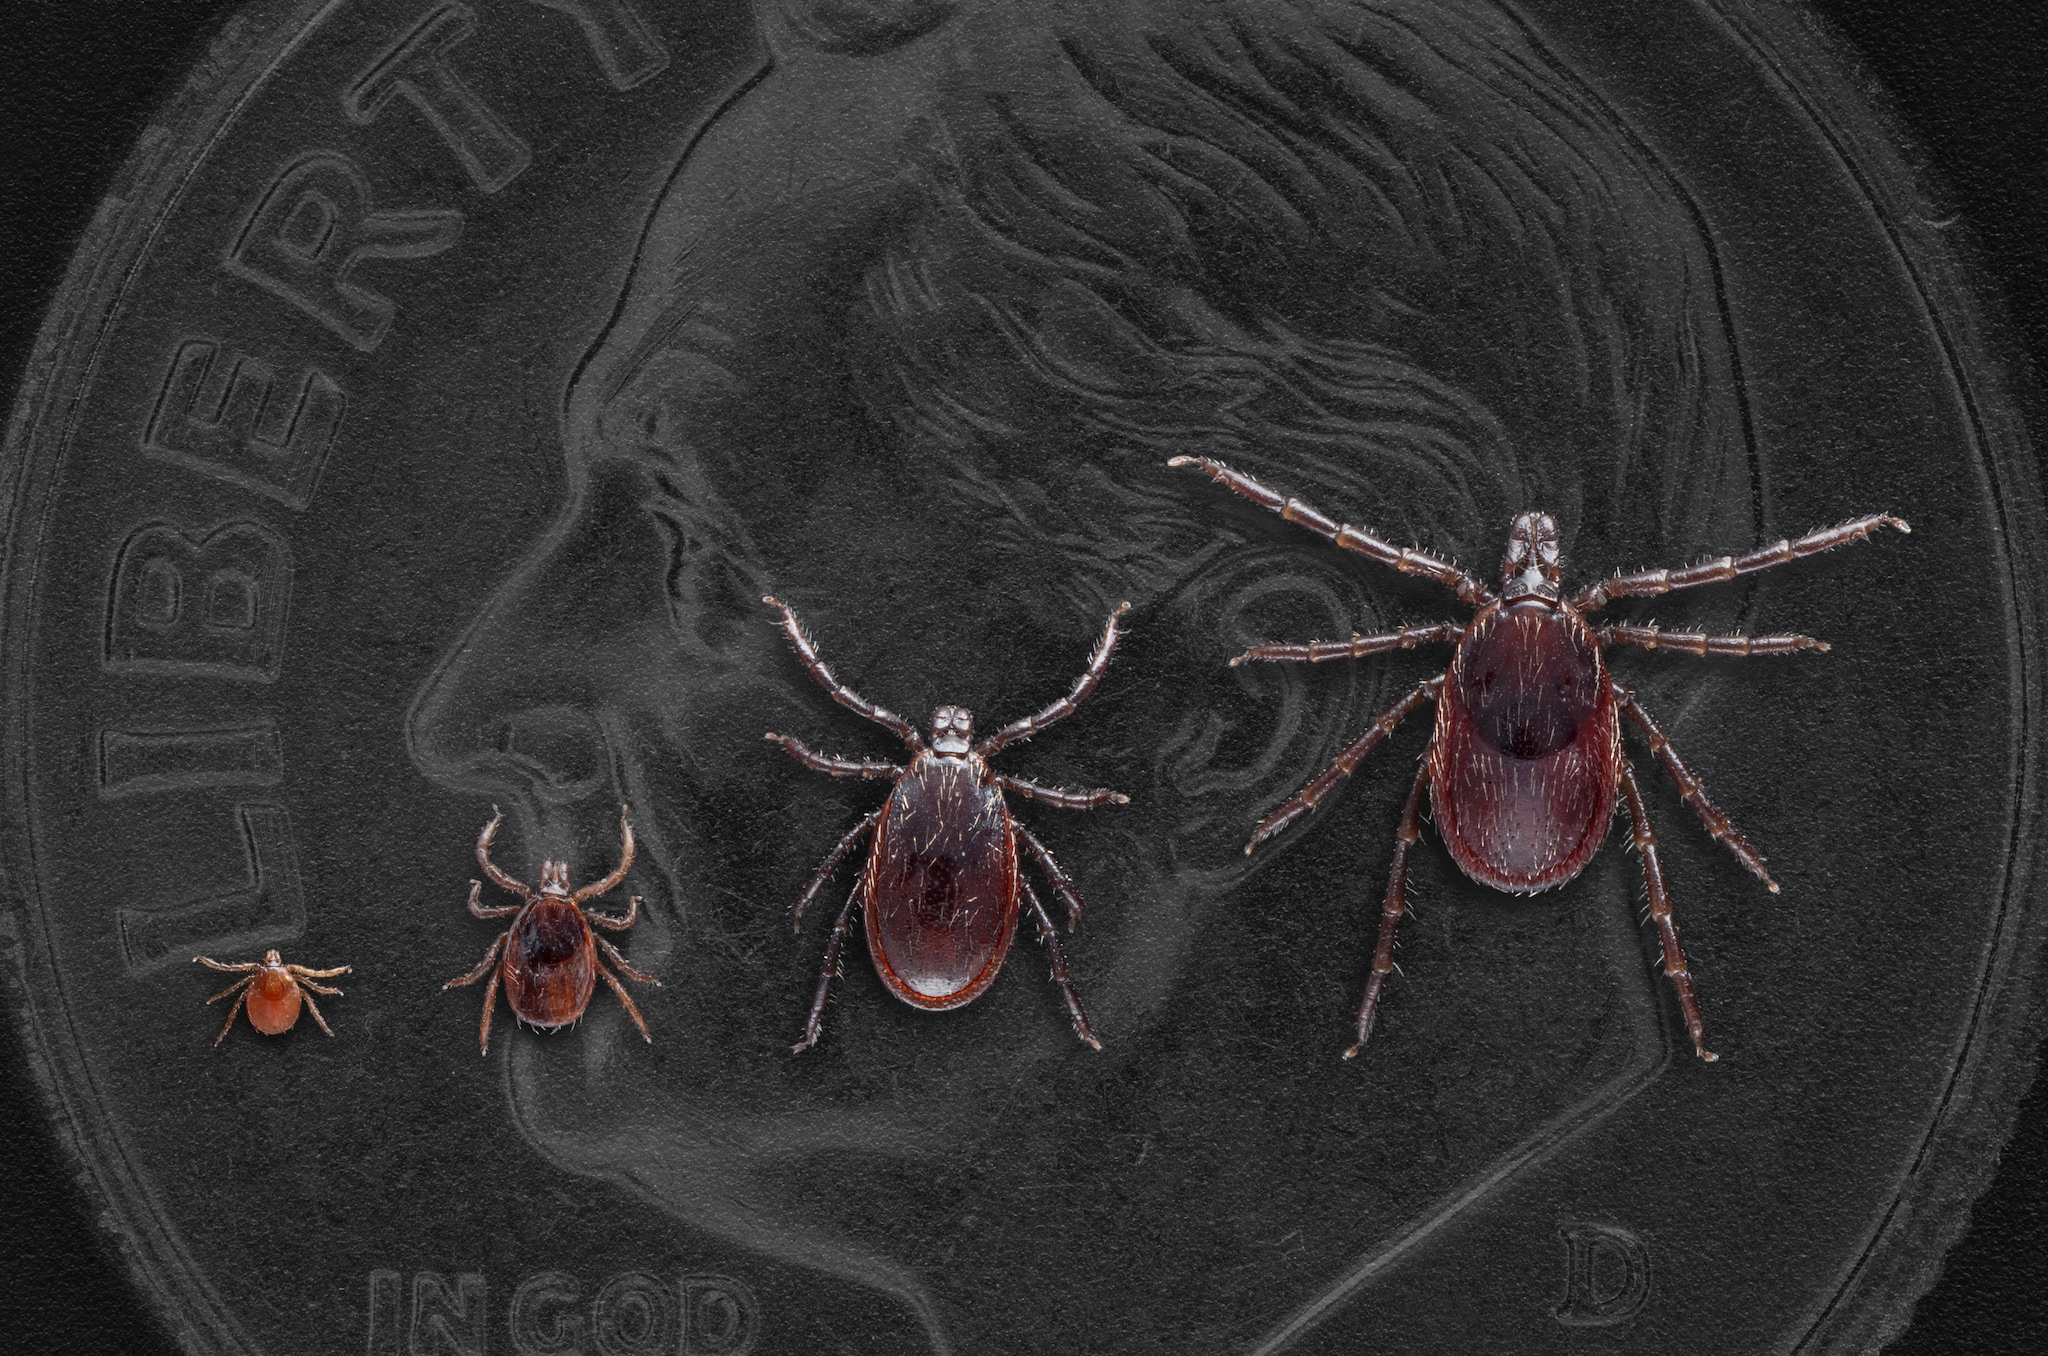 All life stages of Ixodes pacificus. Dime in background for scale.